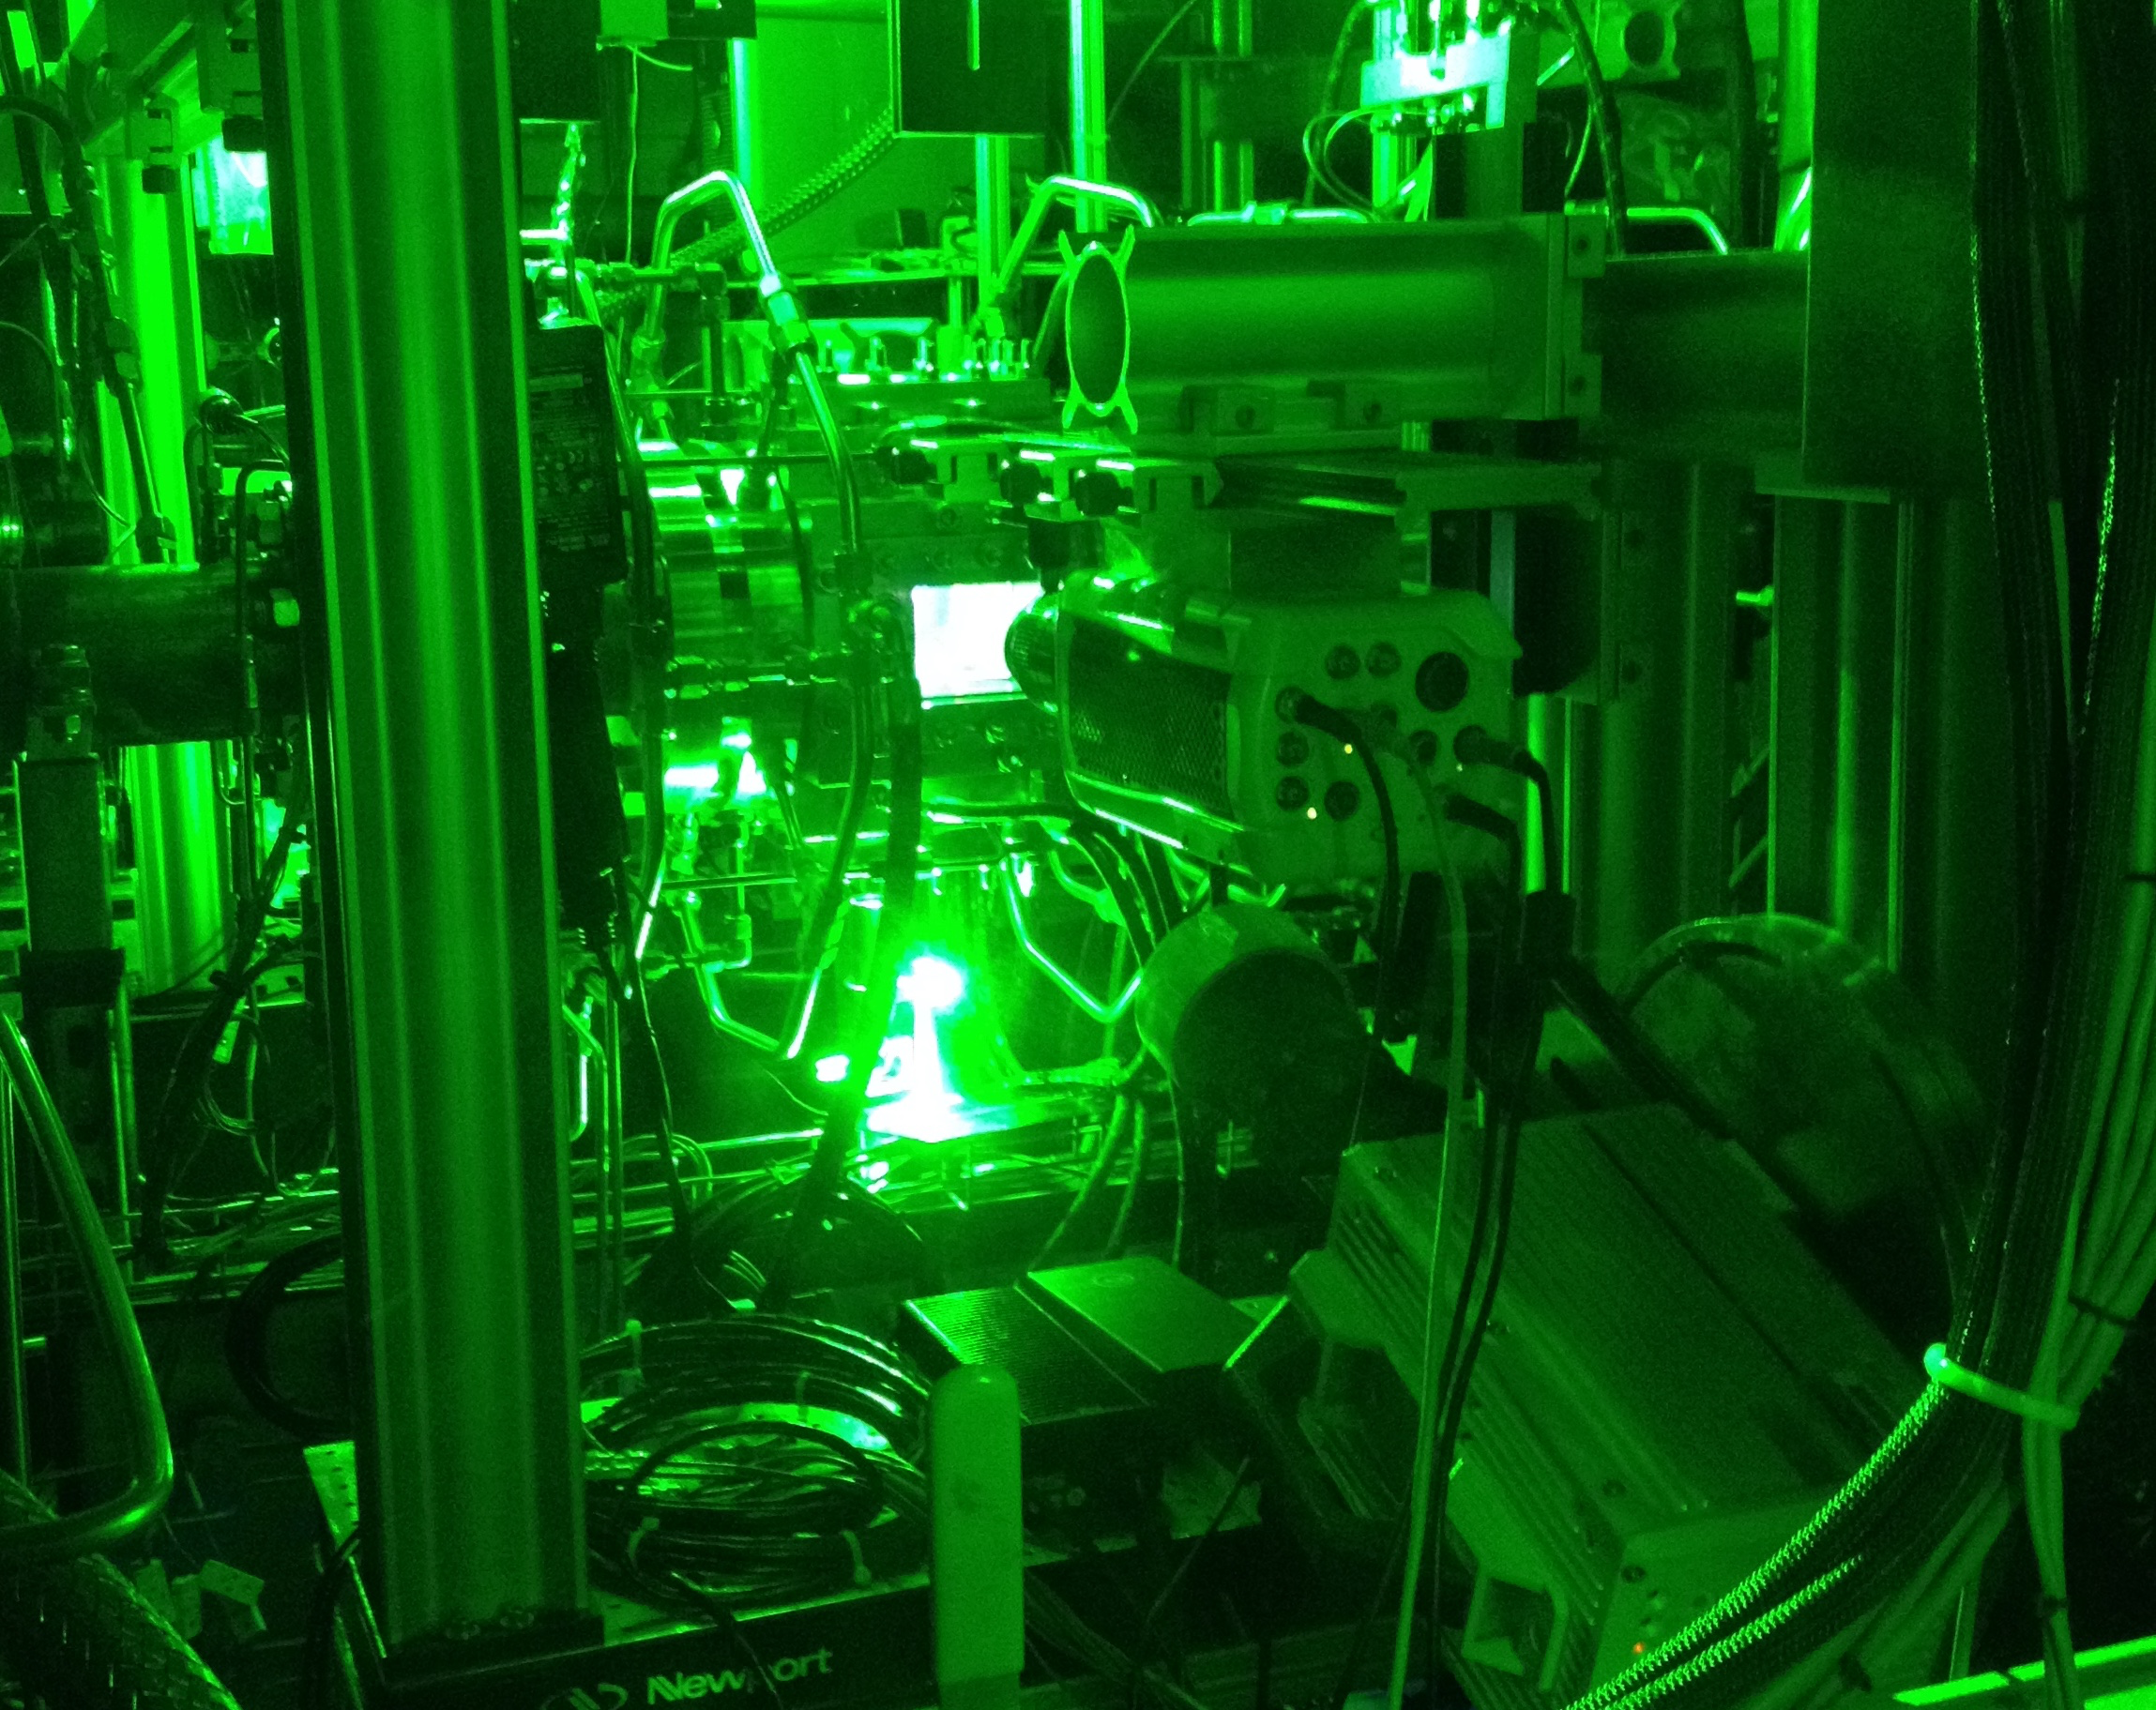 <p style=text-align:left;> High-speed laser diagnostics can provide critical information about reacting flows.  We develop and apply imaging techniques, such as particle image velocimetry (PIV) and planar laser-induced fluorescence (PLIF), to characterize the structure of the fluid flow, the progress of chemical reactions, and the dynamics of these coupled processes.  We apply spectroscopic techniques, such as coherent anti-Stokes Raman scattering (CARS), to quantitatively measure fluid properties such as temperature, pressure, and species concentration.  Shown above is a three-dimensional reconstruction of the large-scale flow structures that were measured in a high-pressure swirl flame using stereoscopic PIV.  The flow is oscillating severely due to a thermo-acoustic instability.</p>
   	  <p style=text-align:left;font-size:85%> <u>Select Publications:</u></p>
	  <p style=text-align:left;font-size:75%> John J. Philo, Mark D. Frederick, and Carson D. Slabaugh. 100 kHz PIV in a liquid-fueled gas turbine swirl combustor at 1 MPa. Proceedings of the Combustion Institute, 2020. doi: 10.1016/j.proci.2020.06.066.</p>
   	  <p style=text-align:left;font-size:75%> Robert Zhang, Isaac Boxx, Wolfgang Meier, and Carson D. Slabaugh. Coupled Interactions of a Helical Precessing Vortex Core and the Central Recirculation Bubble in a Swirl Flame at Elevated Power Density. Combustion and Flame, 202:119–131, 2019. doi: 10.1016/j.combustflame.2018.12.035.</p>
   	  <p style=text-align:left;font-size:75%> Lucky V. Tran and Carson D. Slabaugh. On Correlated Measurements in the Transient Thermochromic Liquid Crystals Technique with Multiple Indicators. International Journal of Heat and Mass Transfer, 137:229–241, 2019. doi: 10.1016/j.ijheatmasstransfer.2019.03.077.</p>
      <p style=text-align:left;font-size:75%> Claresta N. Dennis, Carson D. Slabaugh, Isaac Boxx, Wolfgang Meier, and Robert P. Lucht. 5 kHz Thermometry in a Swirl-Stabilized Gas Turbine Model Combustor using Chirped Probe Pulse Femtosecond CARS. Part 1: Experimental Measurements. Combustion and Flame, 173:441–453, 2016. doi: 10.1016/j.combustflame.2016.02.033.</p>
      <p style=text-align:left;font-size:75%>  Carson D. Slabaugh, Andrew C. Pratt, and Robert P. Lucht. Simultaneous 5 kHz OH-PLIF/PIV for the study of turbulent combustion at engine conditions. Applied Physics B: Lasers and Optics, 118(1), 2015. doi: 10.1007/s00340-014-5960-5.</p>